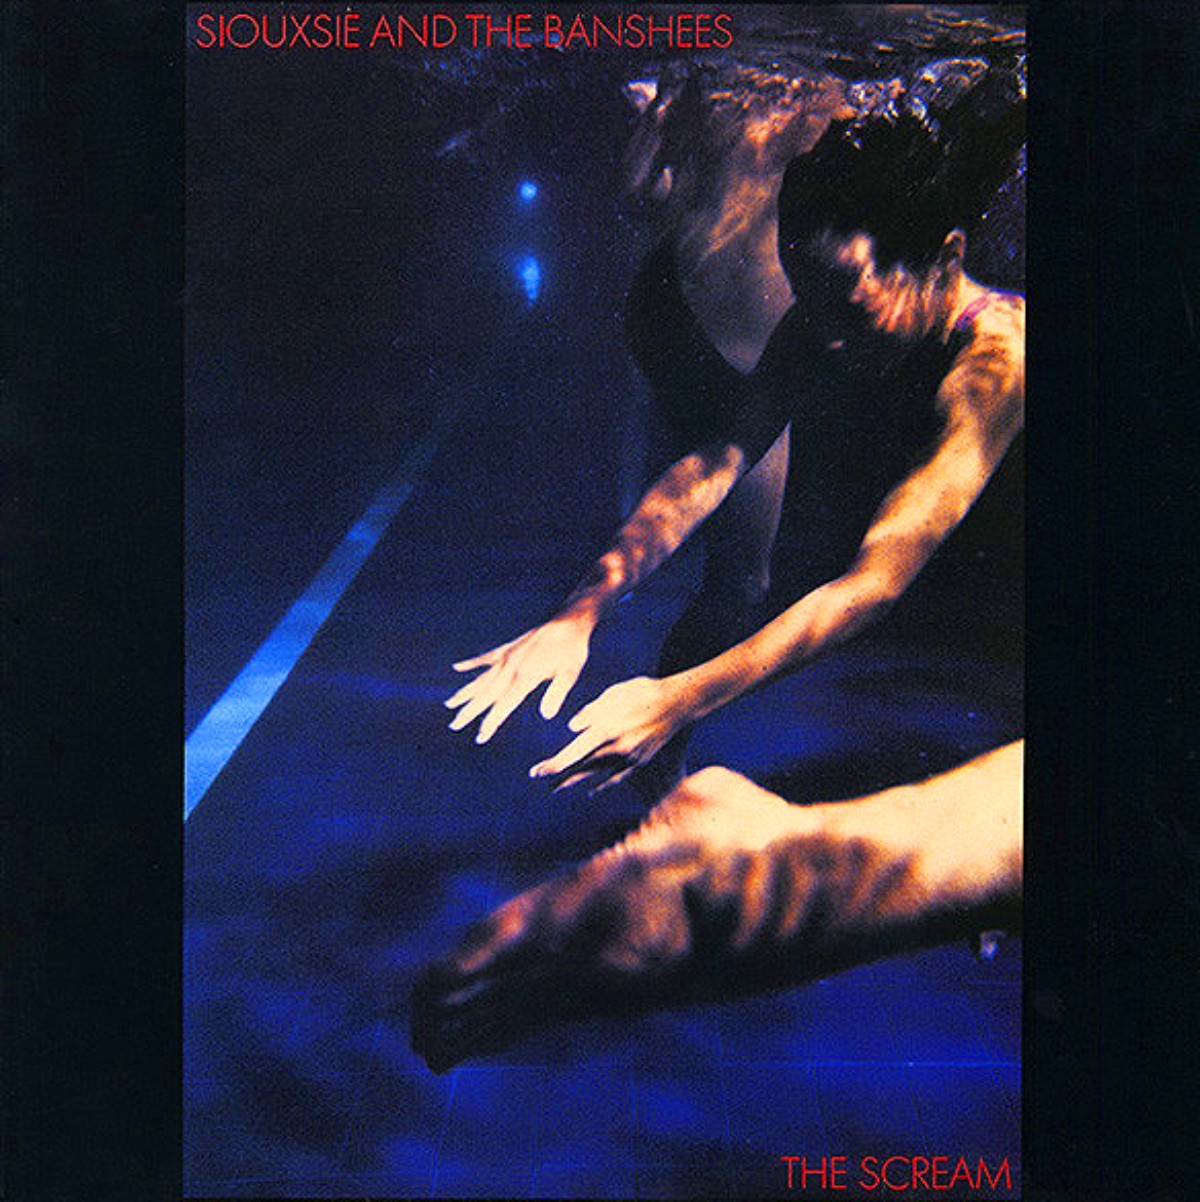 Siouxsie And The Banshees，專輯“The Scream”（1978）